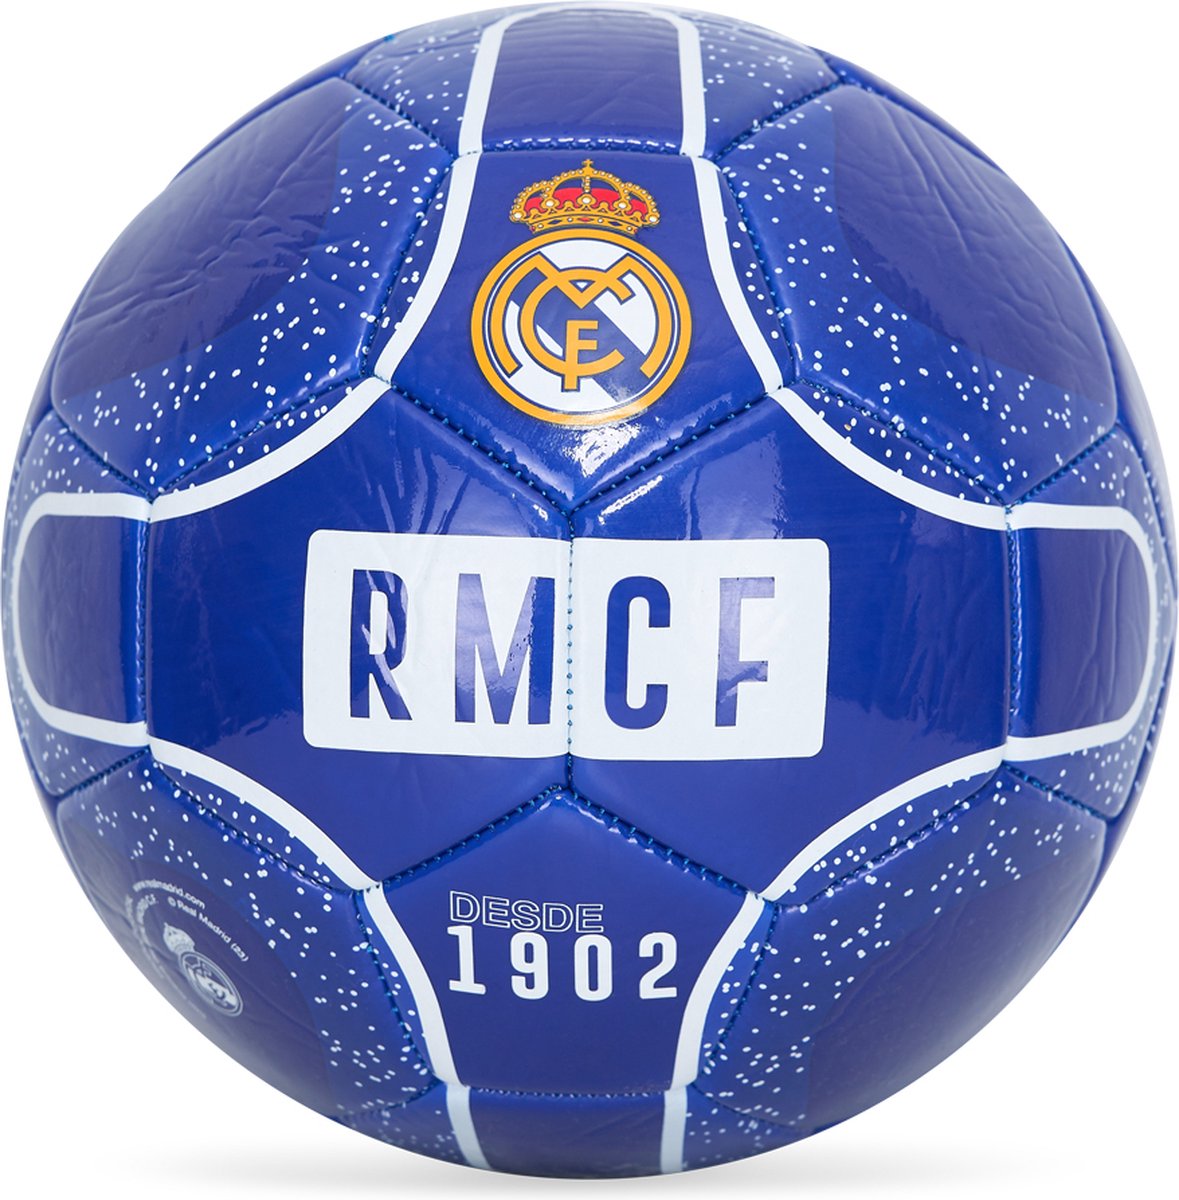 Real Madrid 'RMCF' voetbal